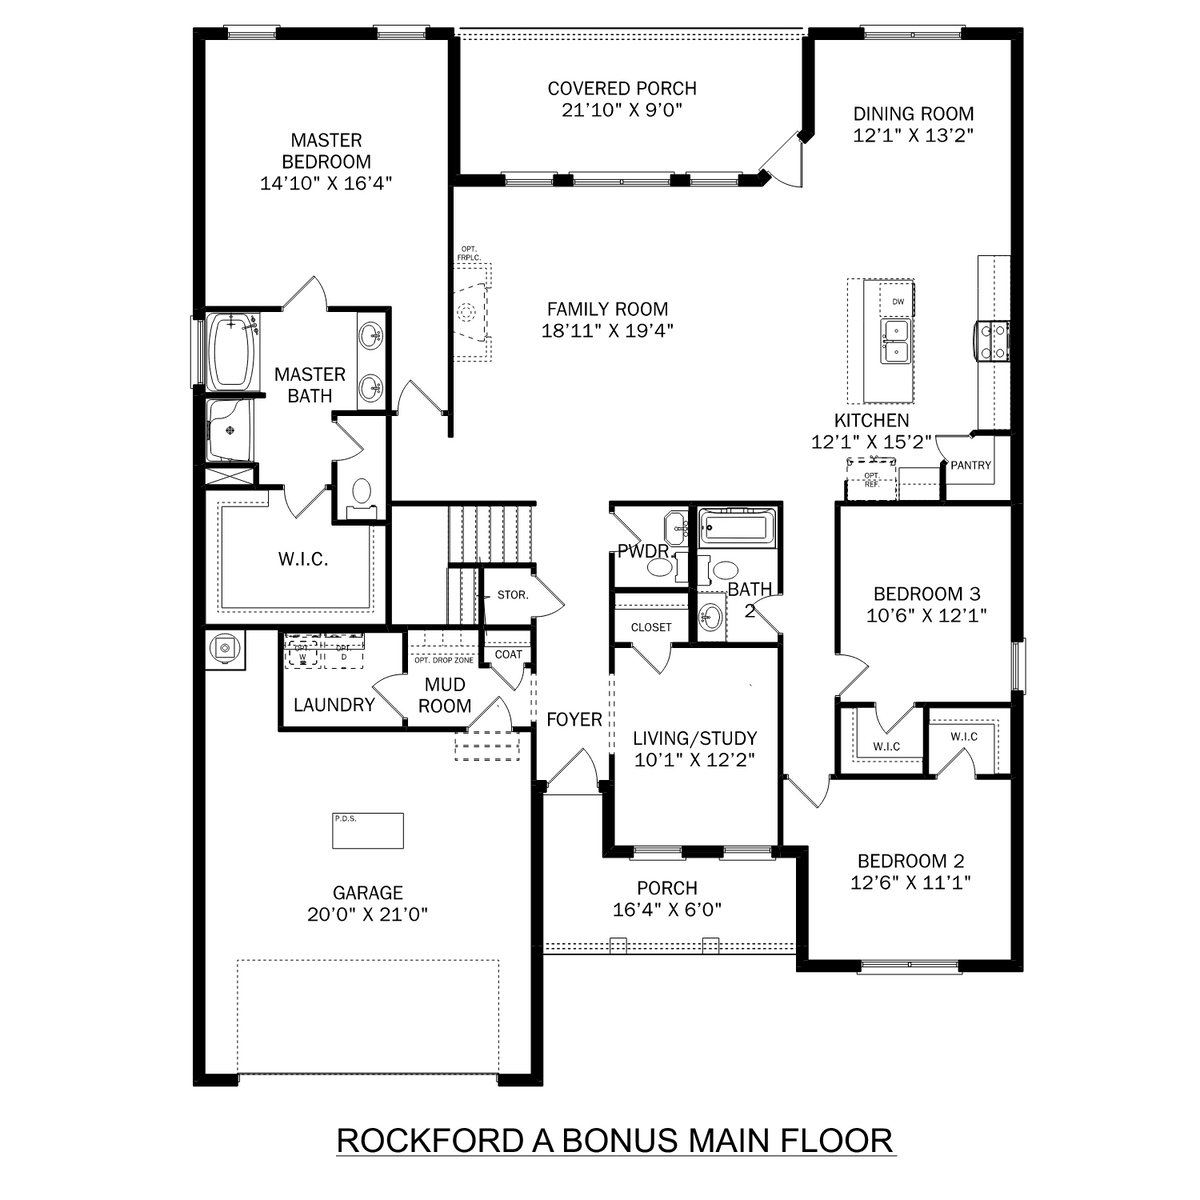 1 - The Rockford with Bonus buildable floor plan layout in Davidson Homes' Creekside community.